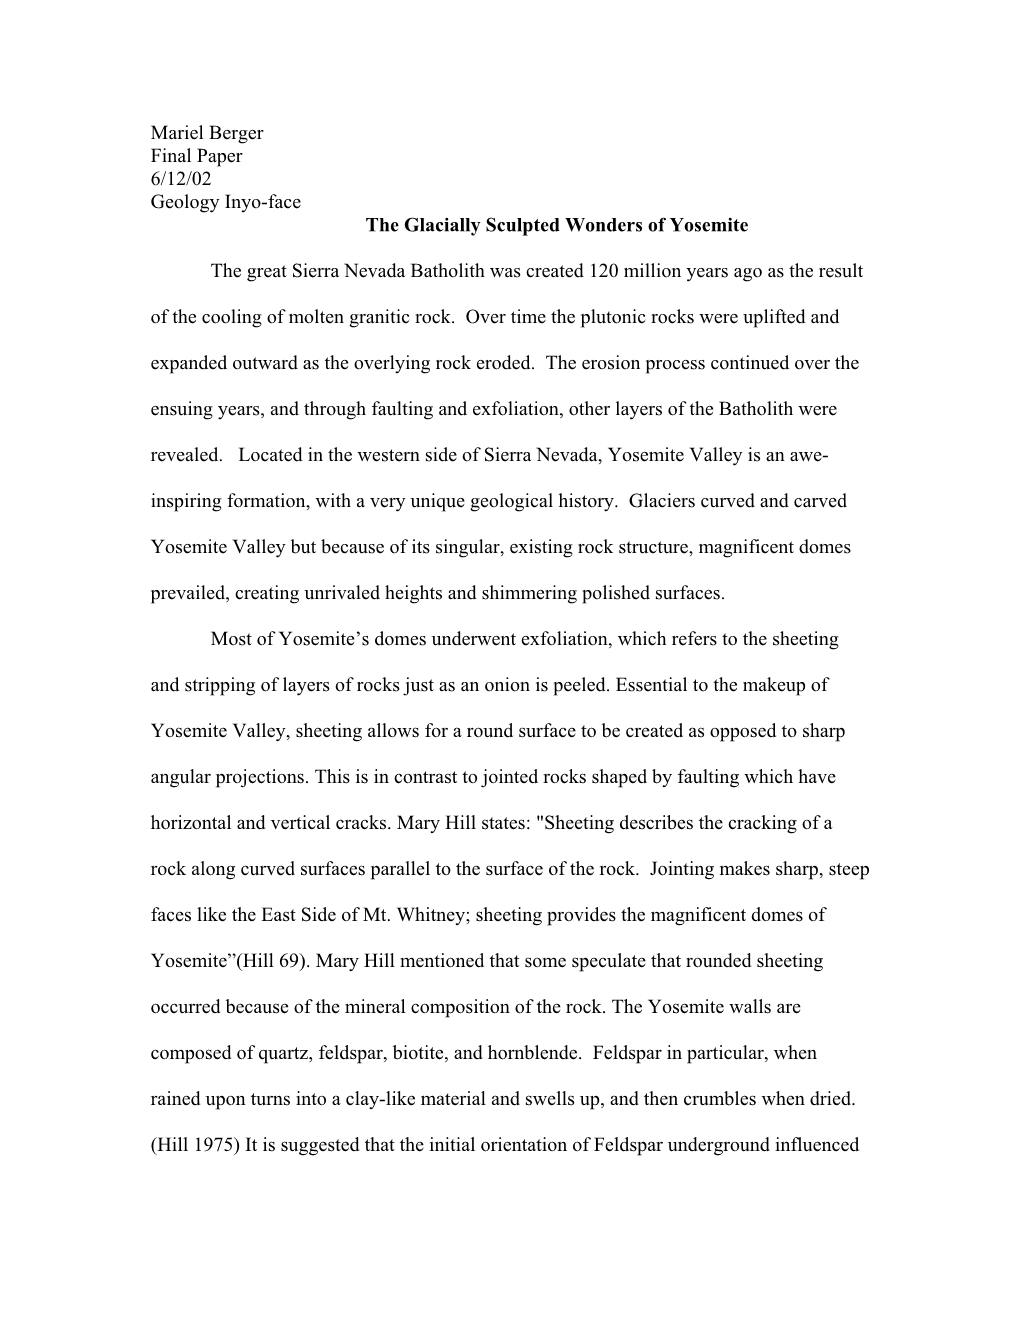 Mariel Berger Final Paper 6/12/02 Geology Inyo-Face the Glacially Sculpted Wonders of Yosemite